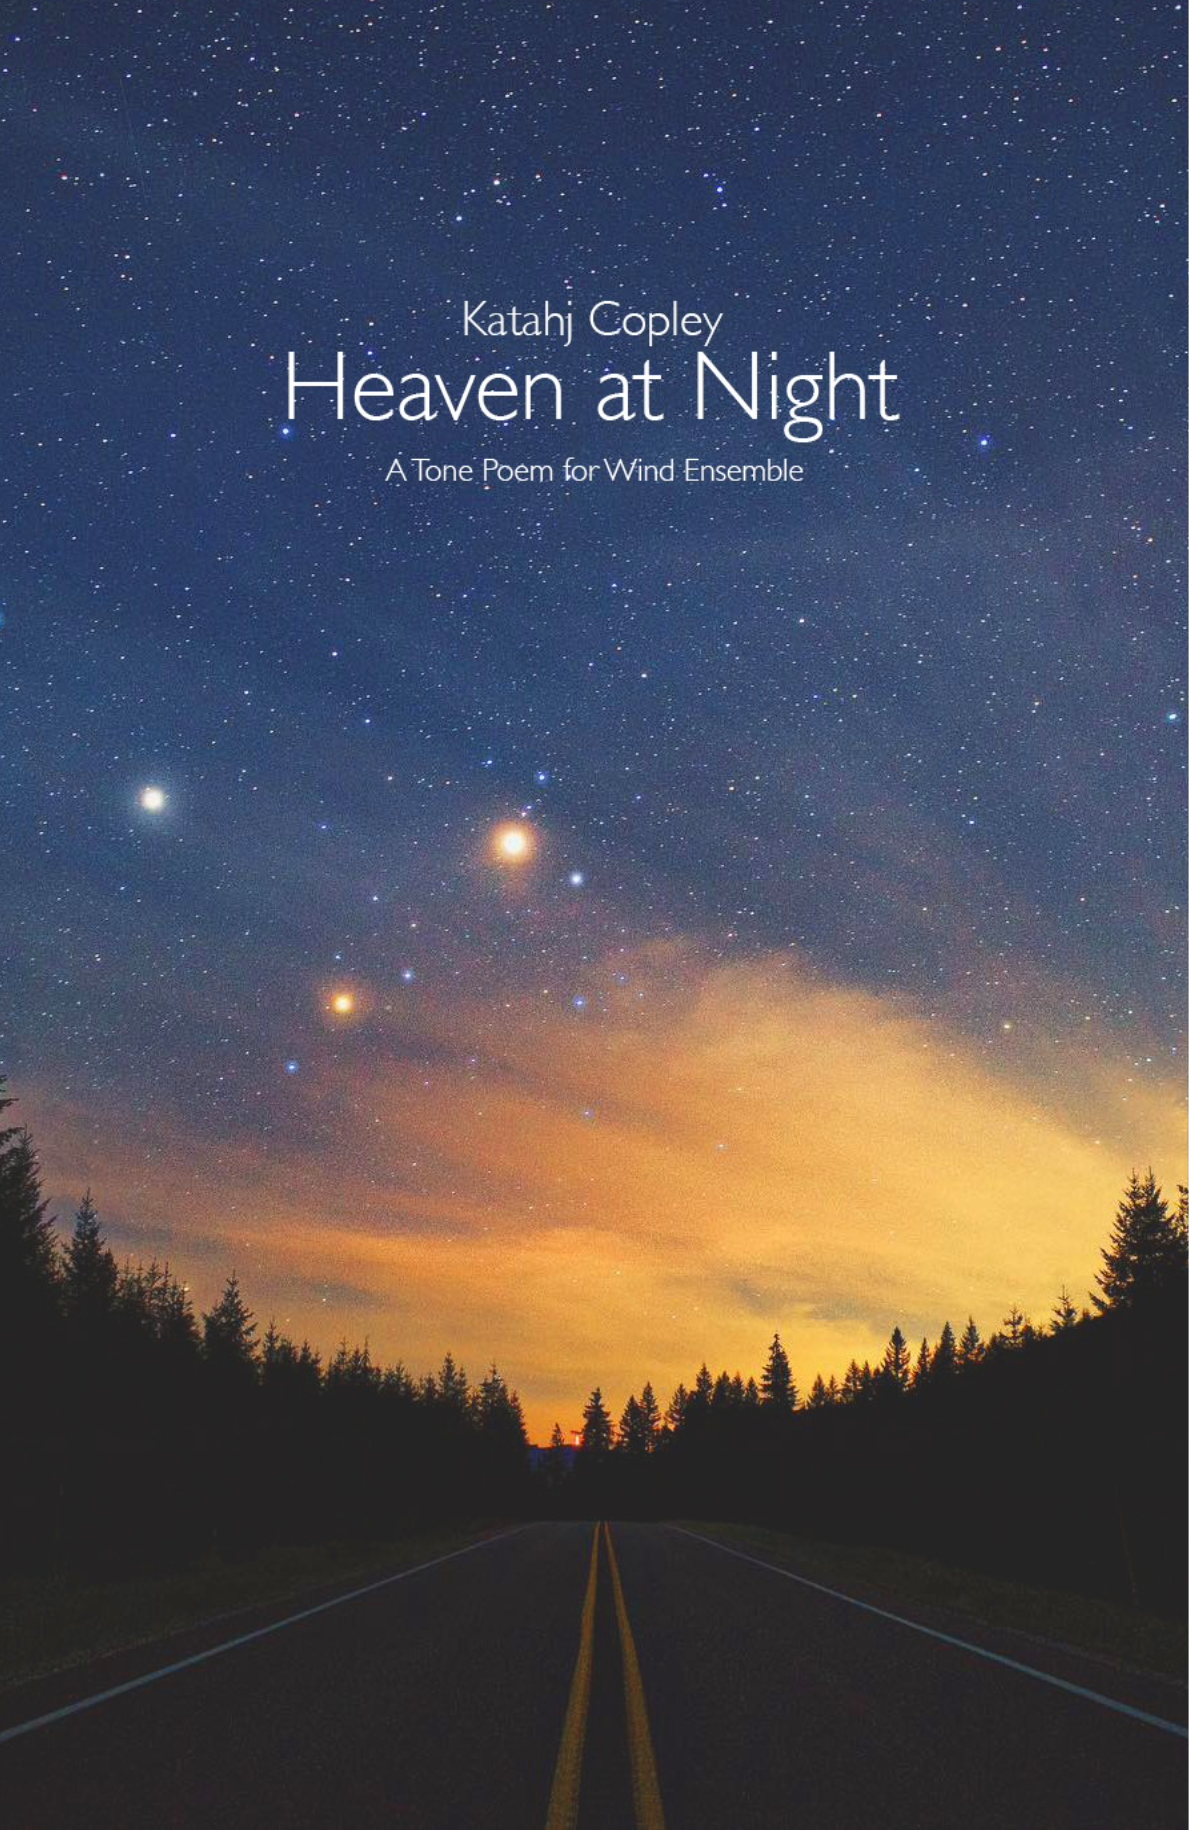 Heaven At Night (Score Only) by Katahj Copley